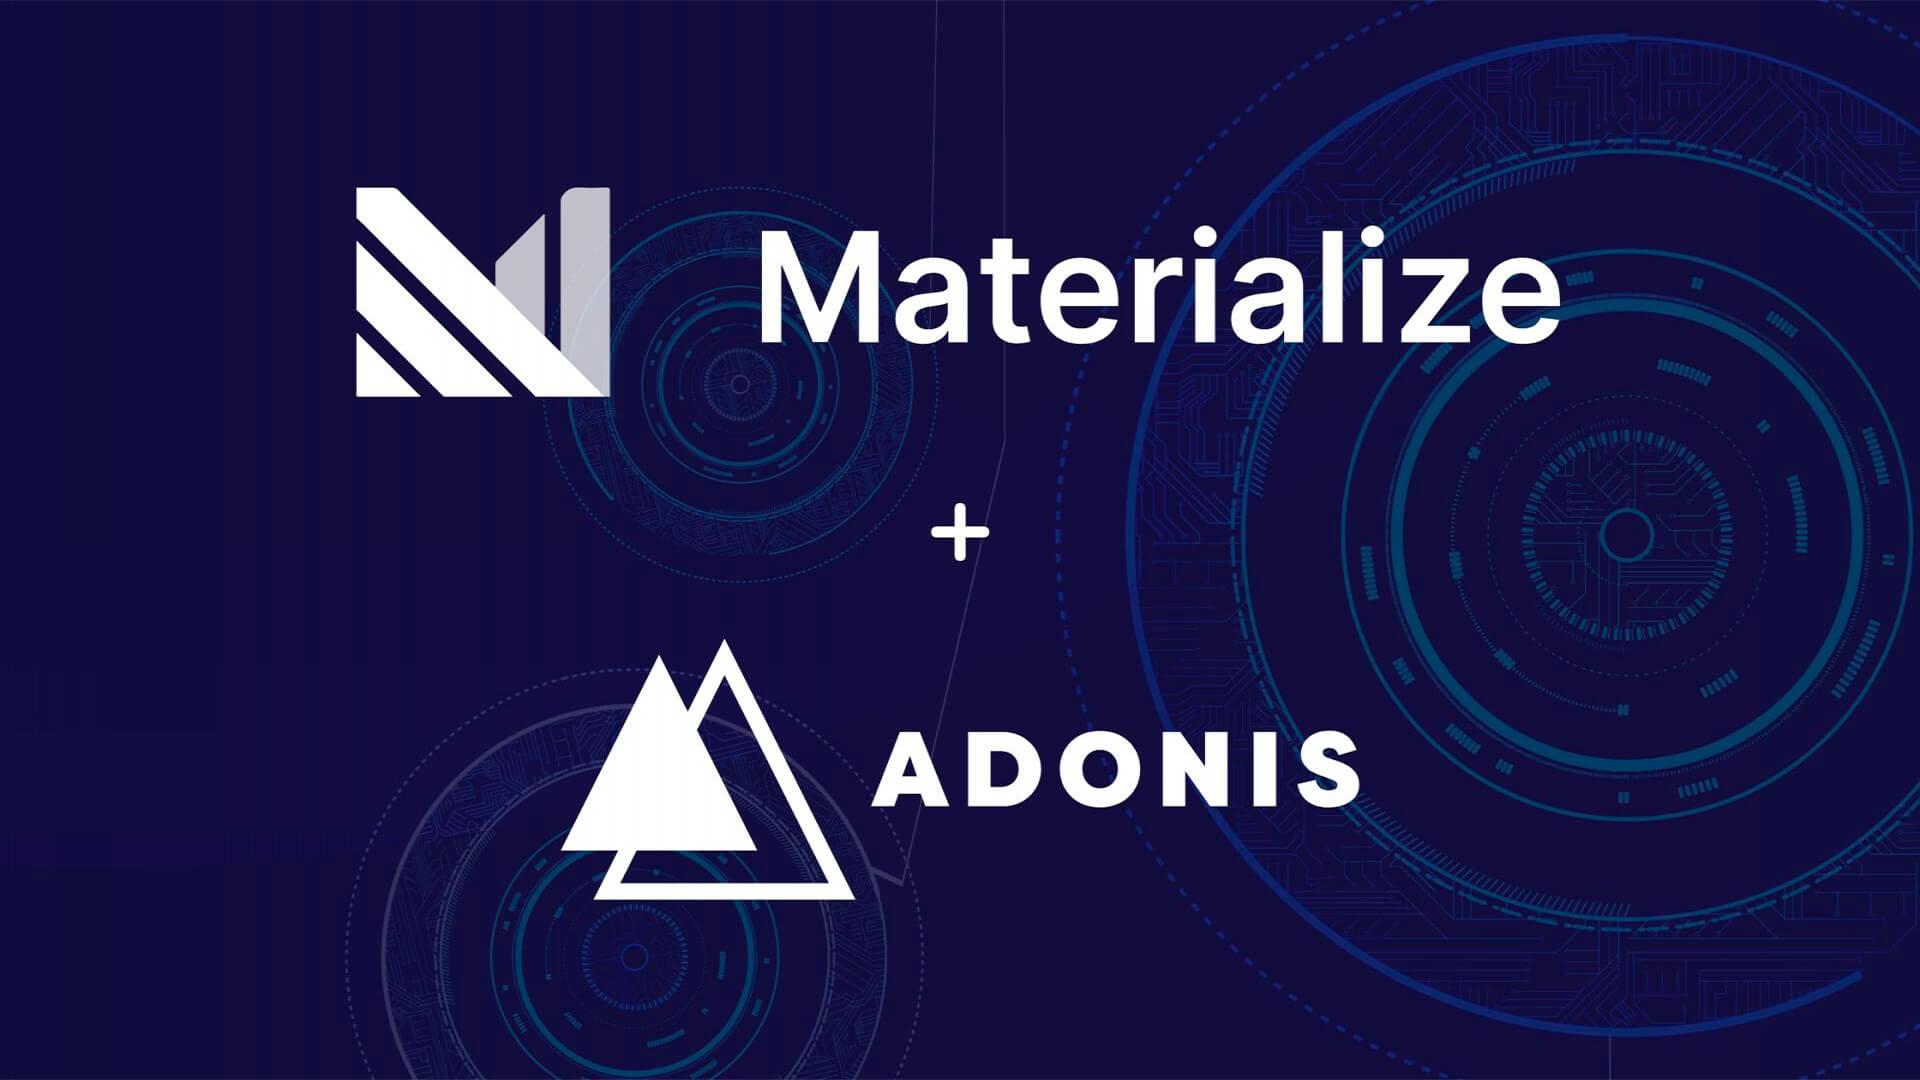 Building a real-time web application with Materialize and AdonisJS